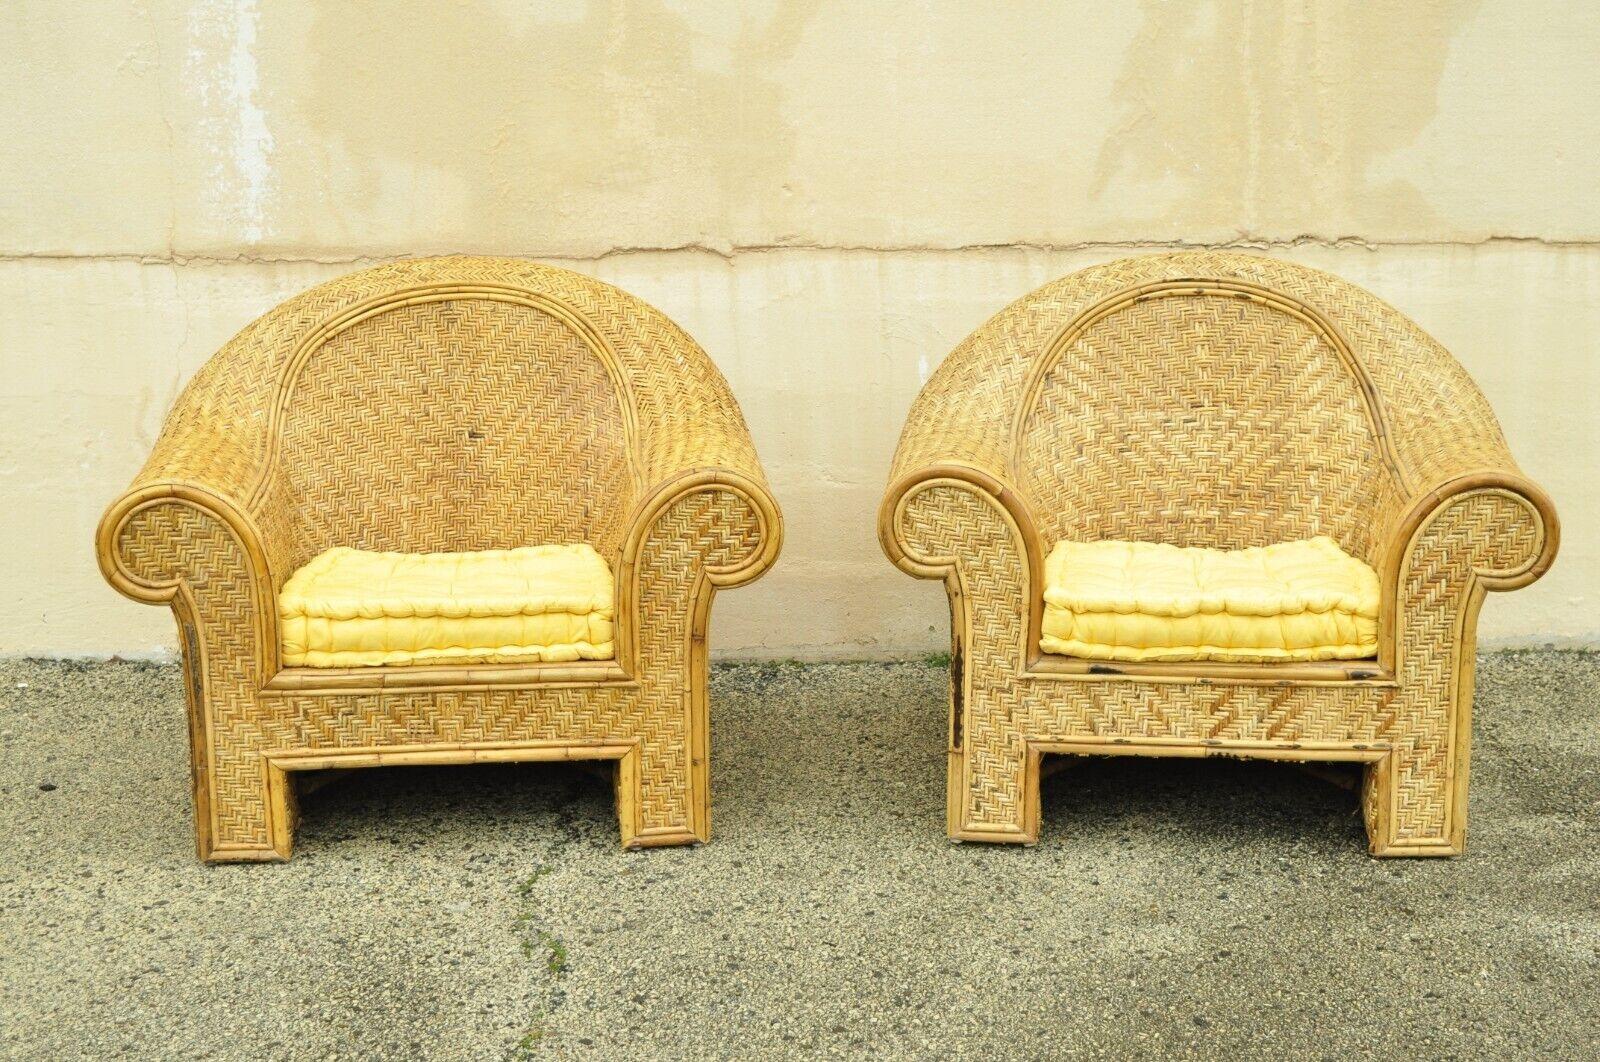 Ralph Lauren Attr. Large Woven Wicker Rattan Club Lounge Chairs - a Pair In Good Condition For Sale In Philadelphia, PA